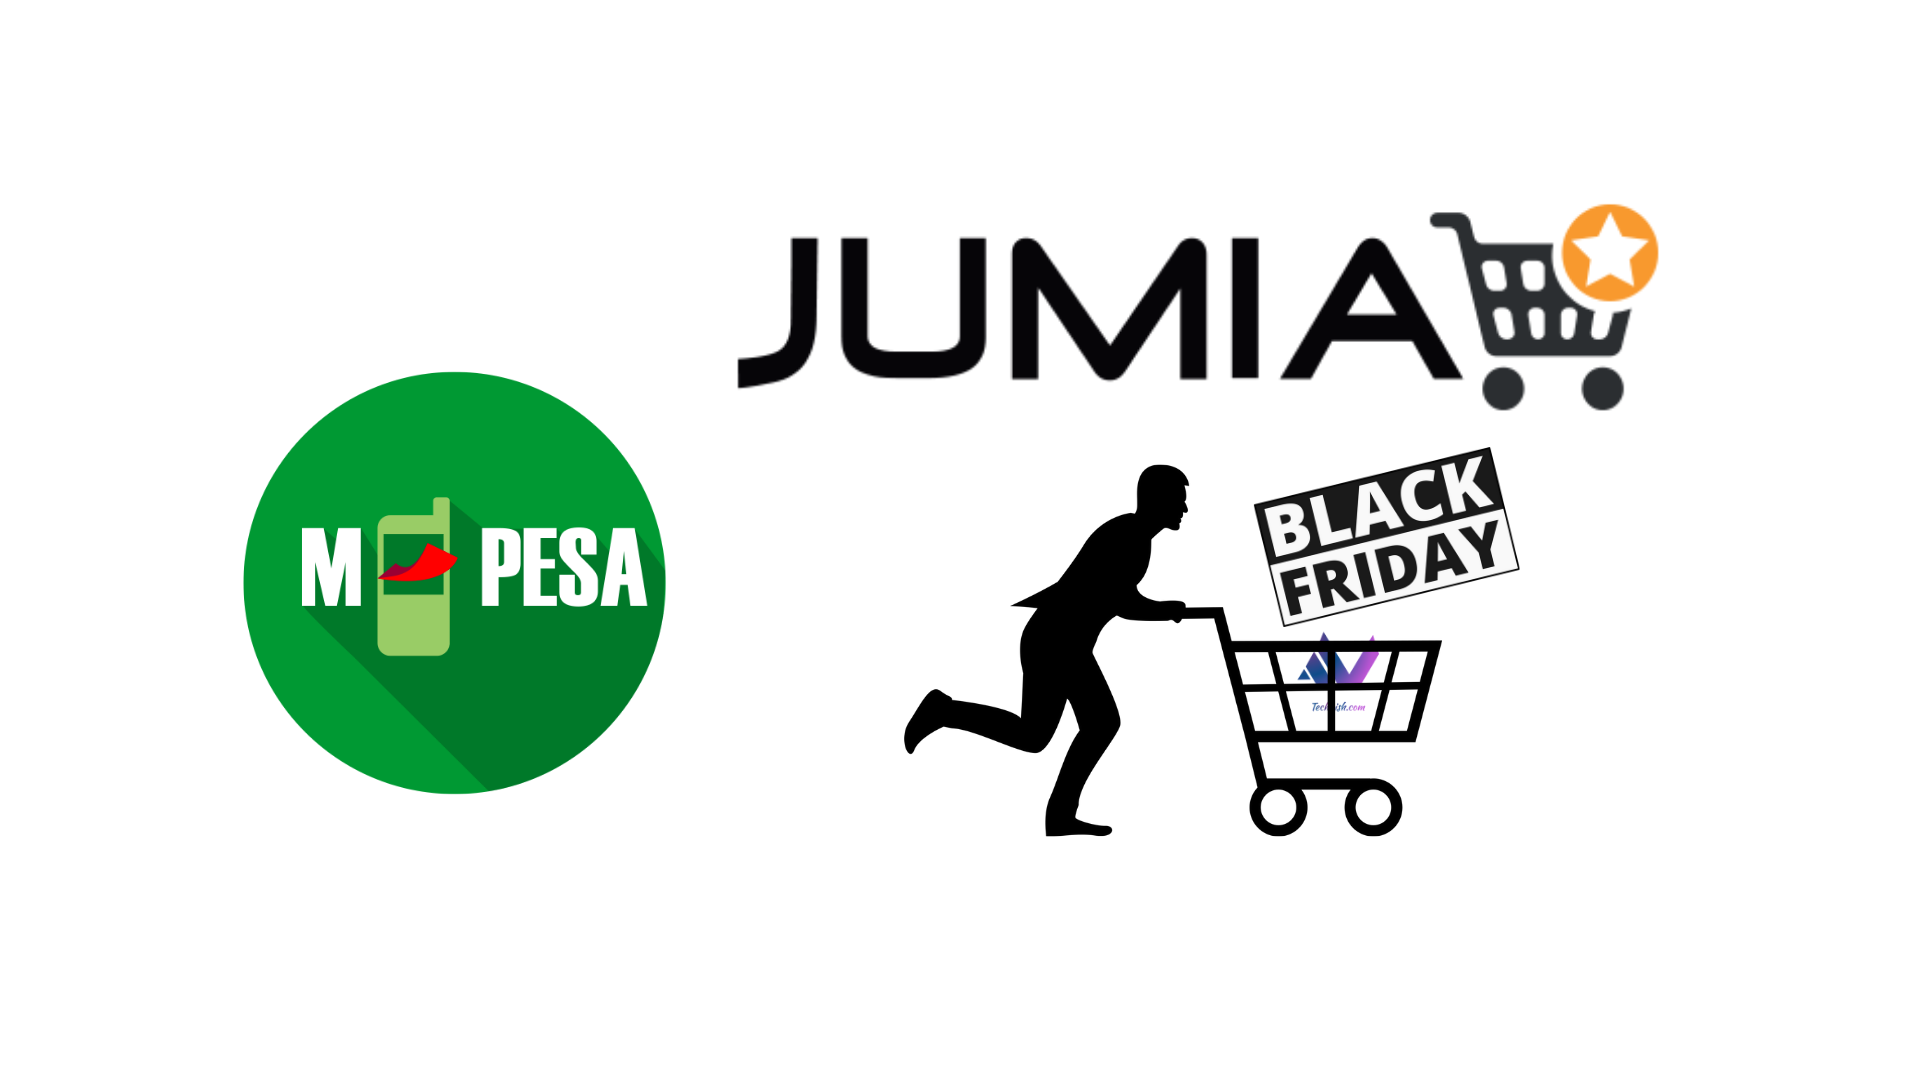 M-Pesa customers to get 5% off on Jumia throughout November